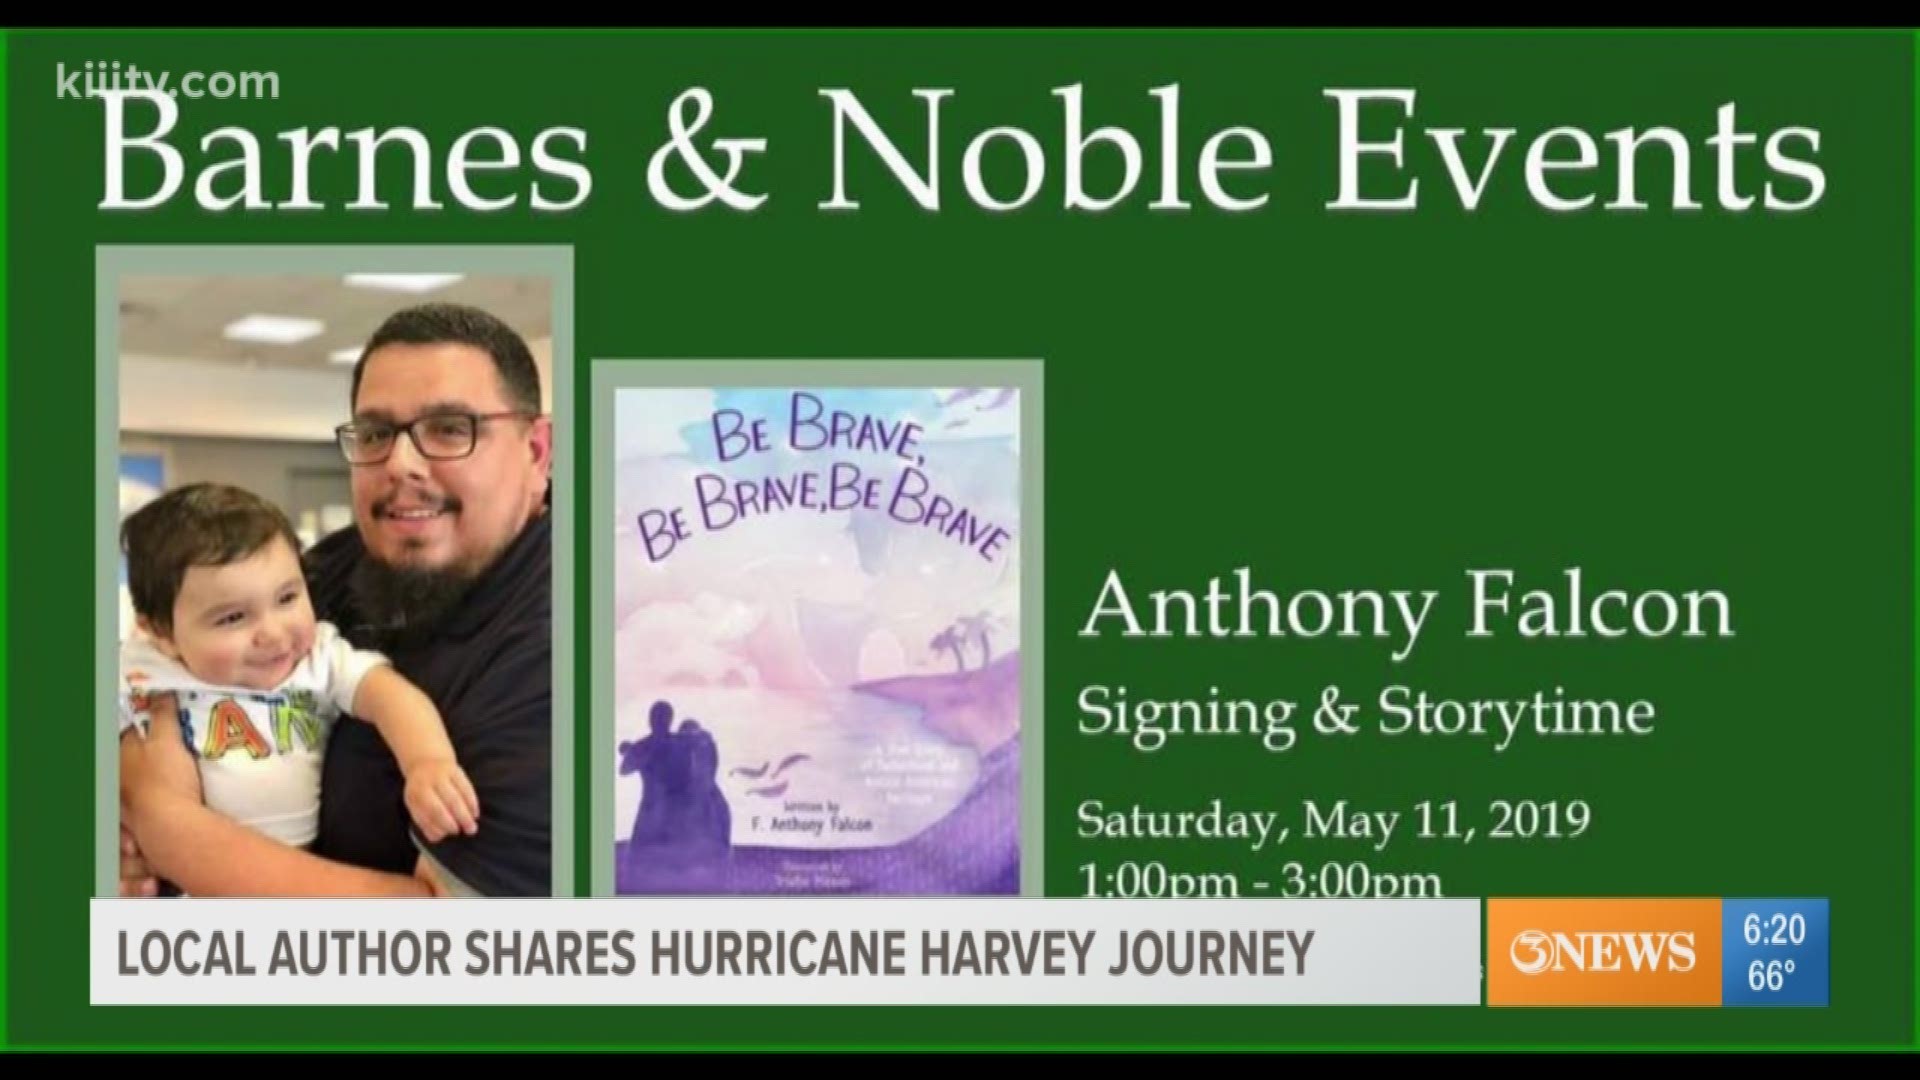 The Corpus Christi author of "Be brave, Be brave, Be brave" shares how he was inspired to write a children's book after hurricane Harvey.